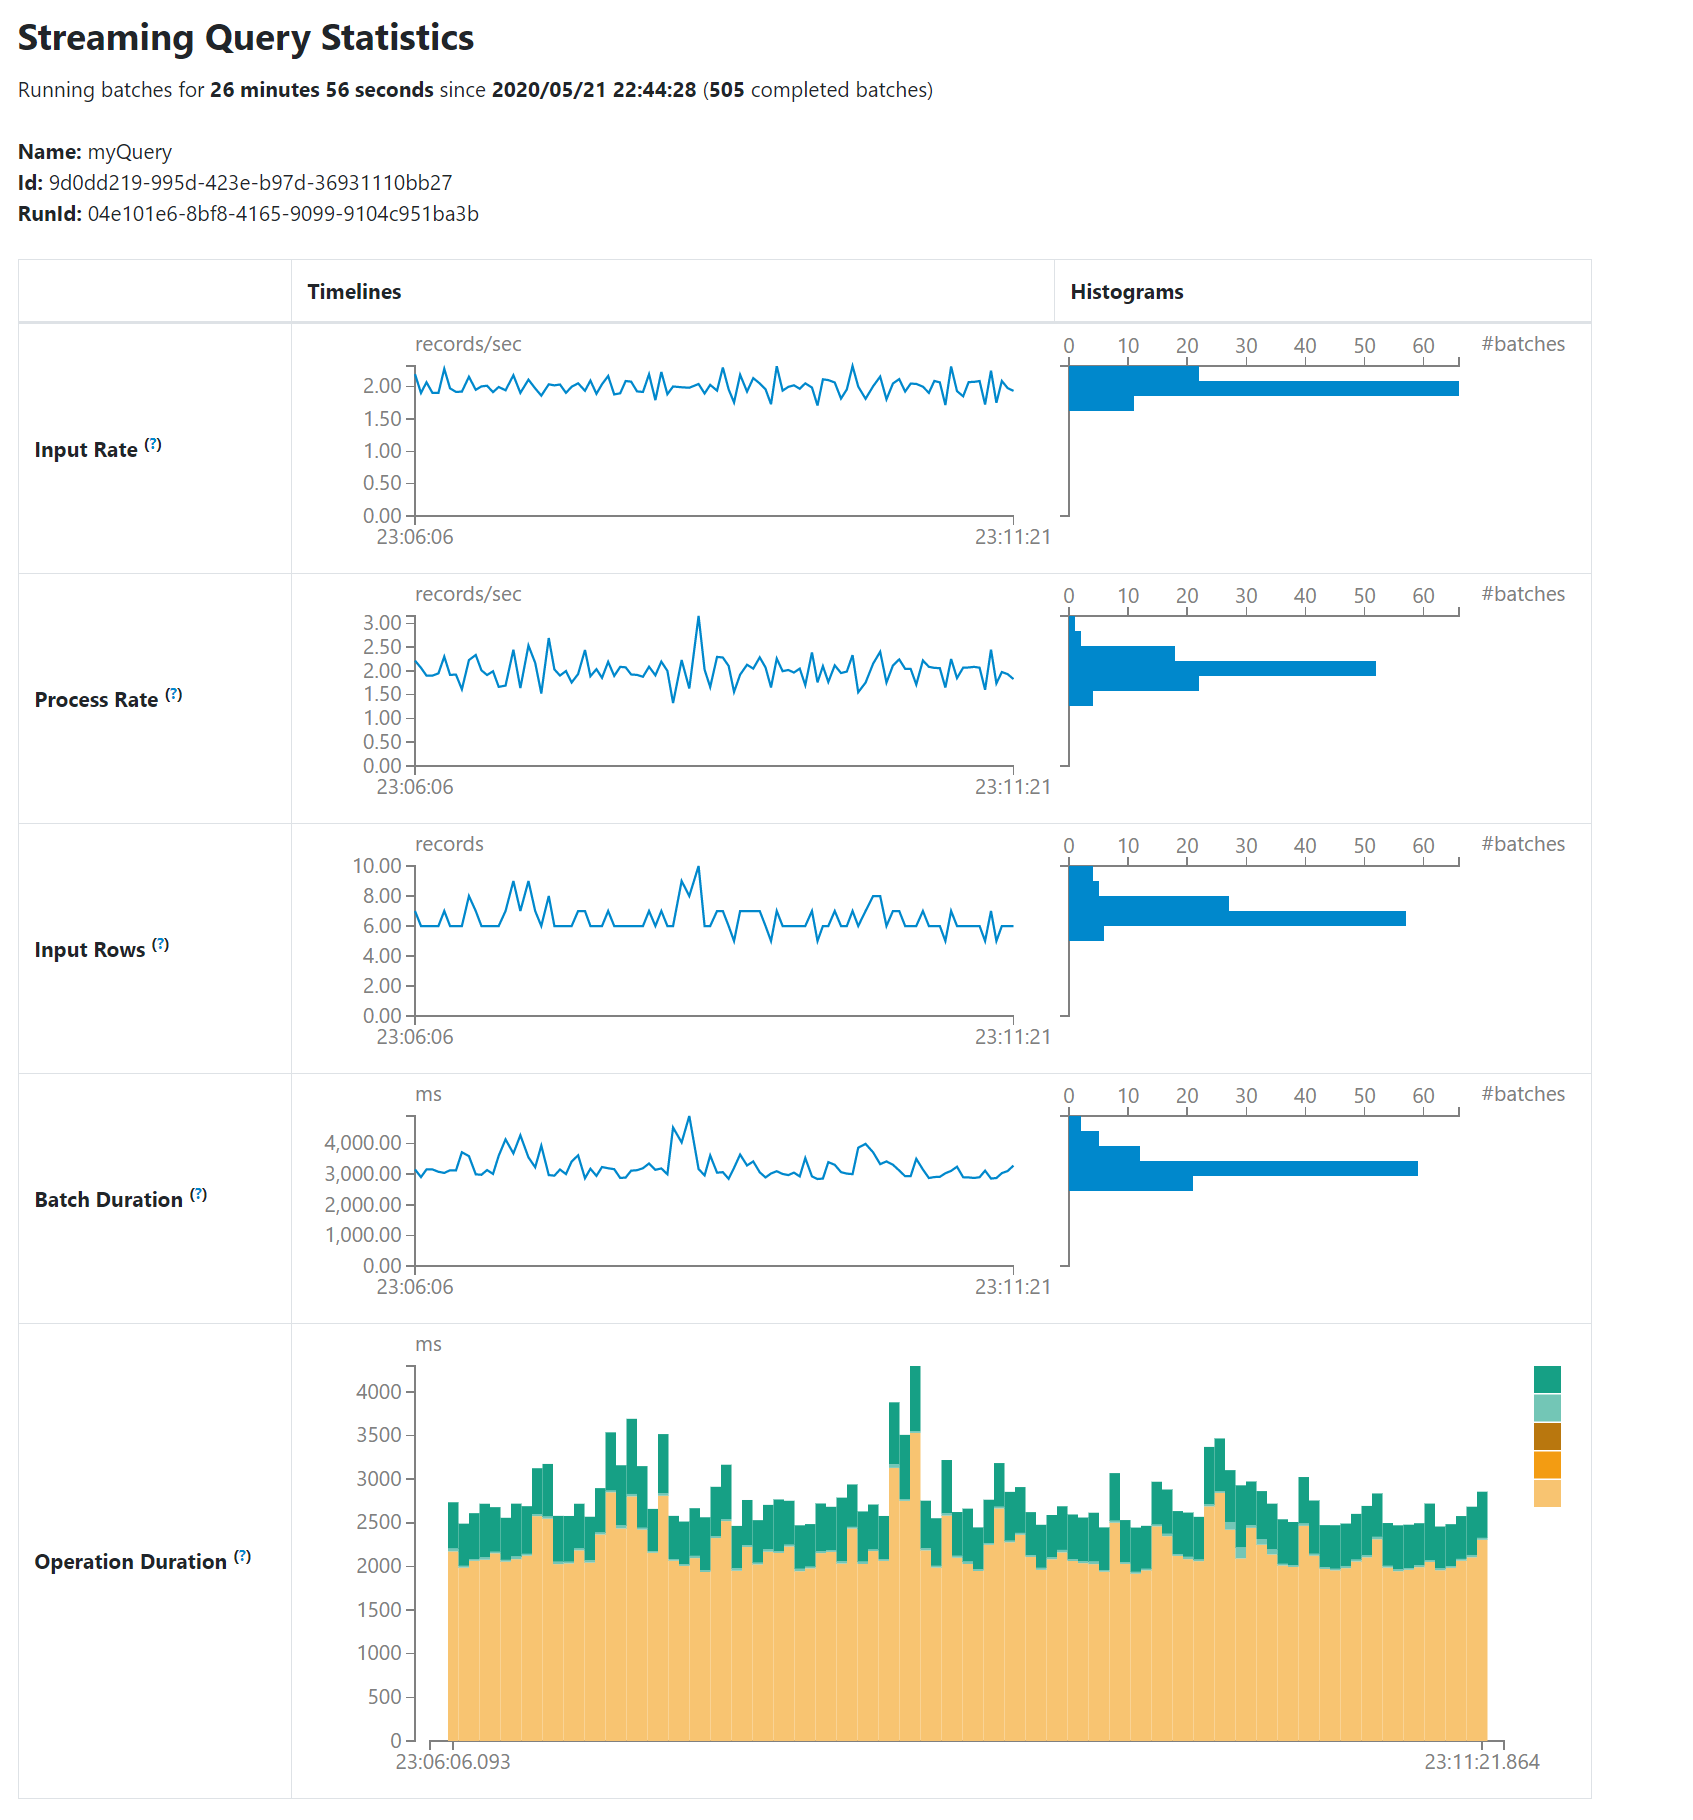 Spark 3.0 is available in Databricks: What are we excited about?